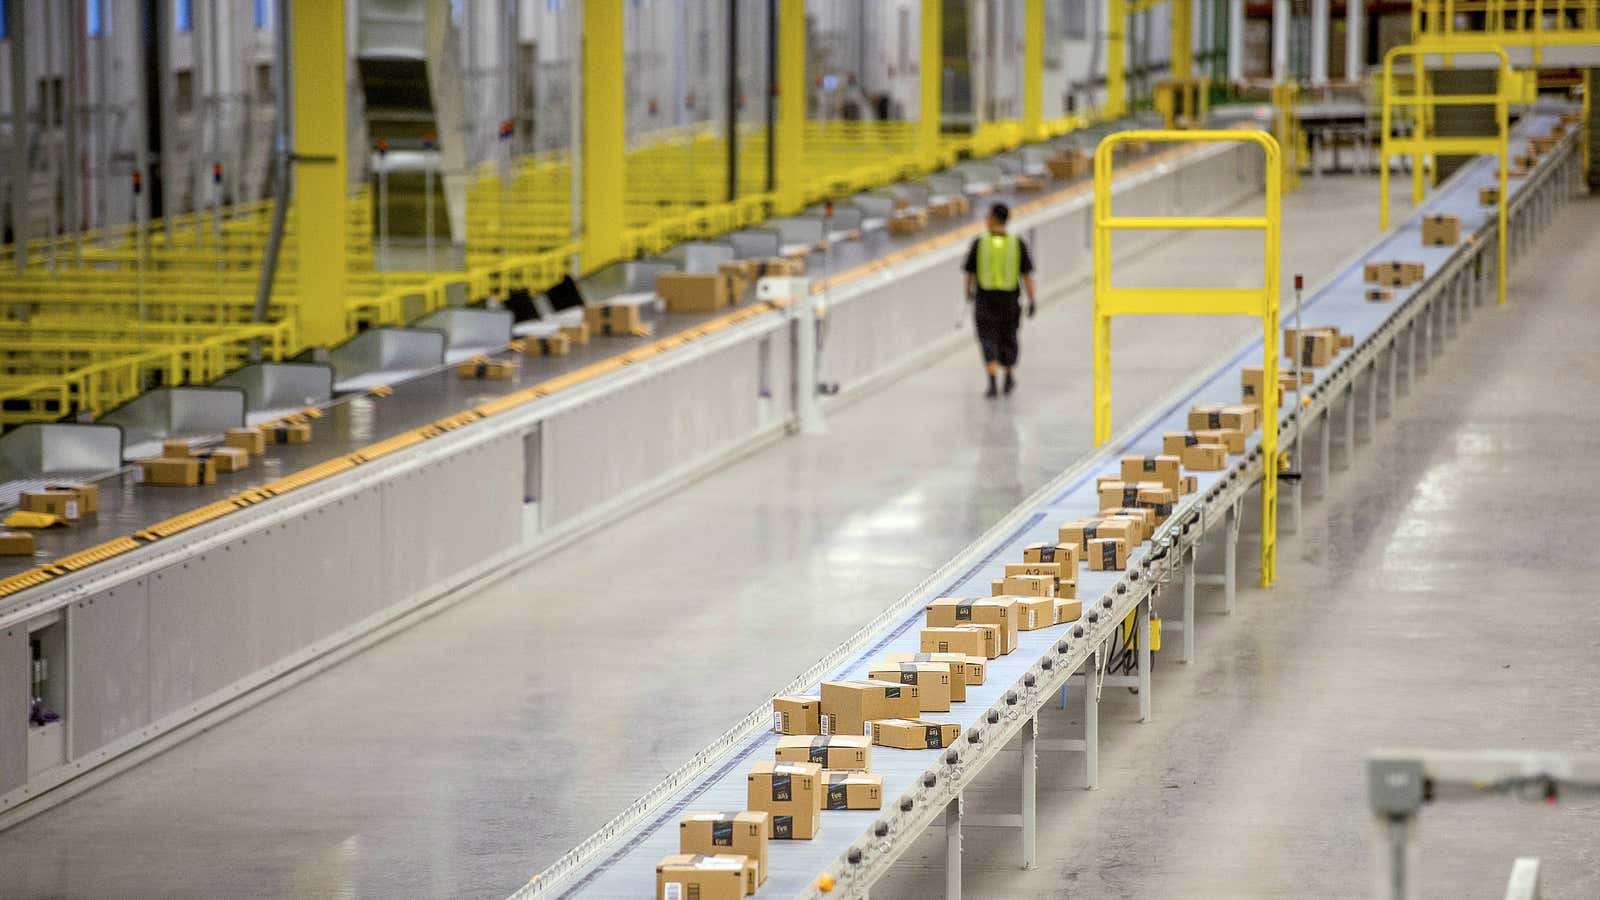 Amazon is going to make you pay more for online orders to qualify for free shipping.